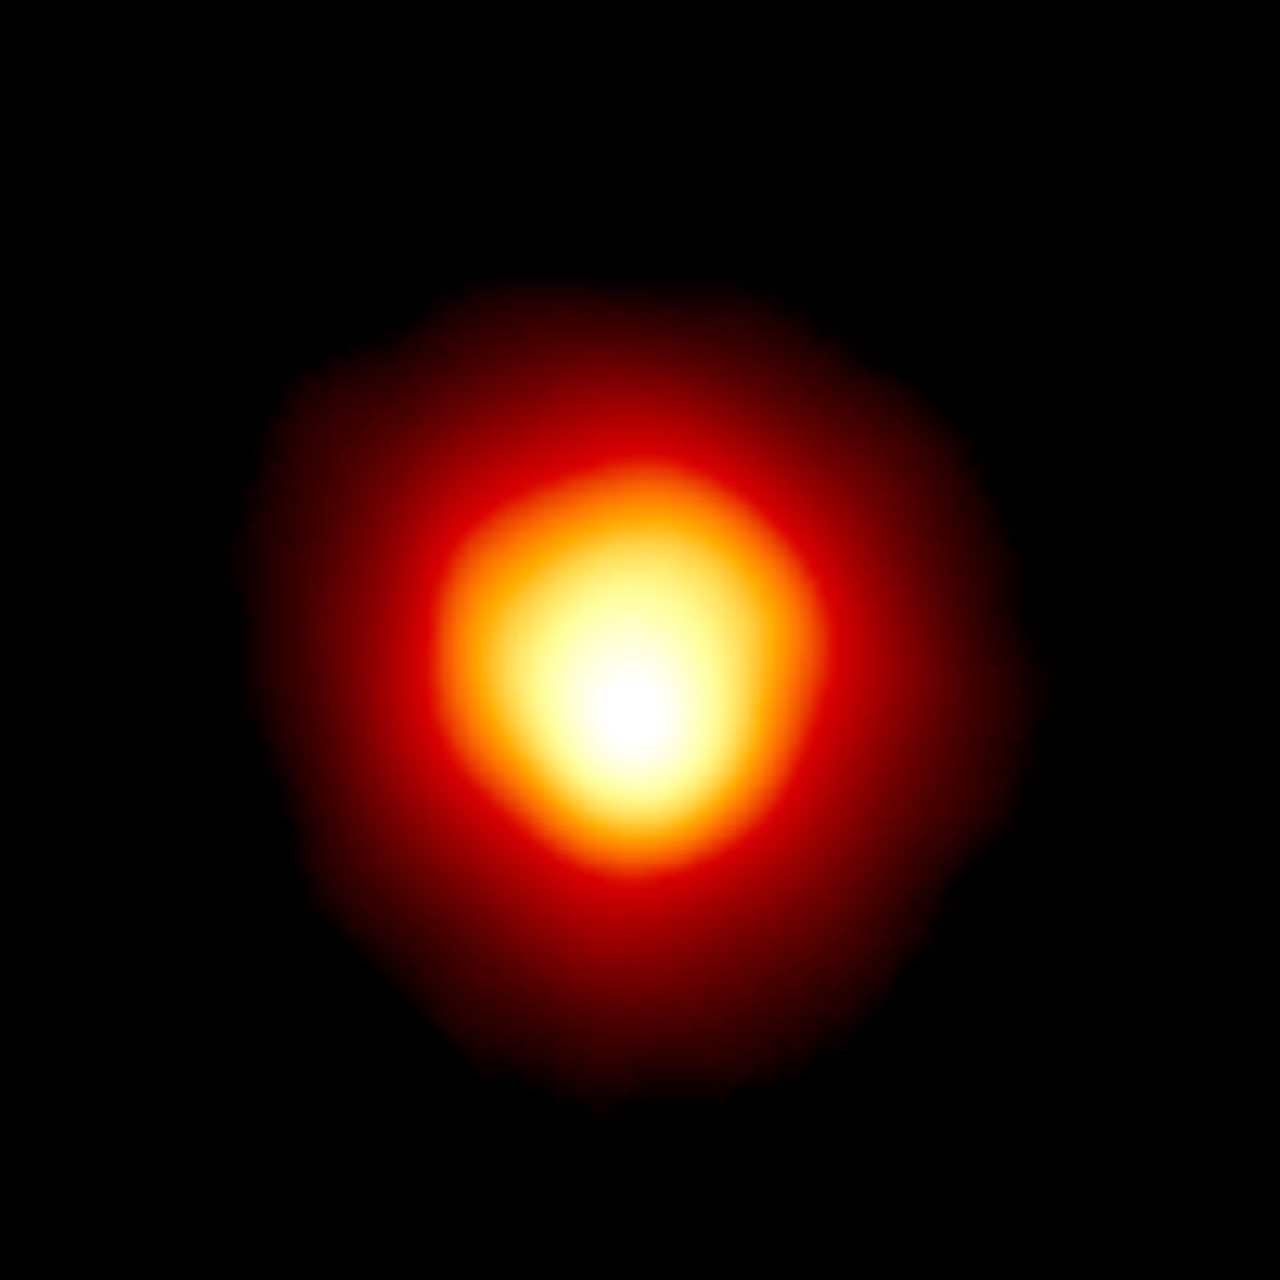 Betelgeuse supernova What effects will occur on Earth?